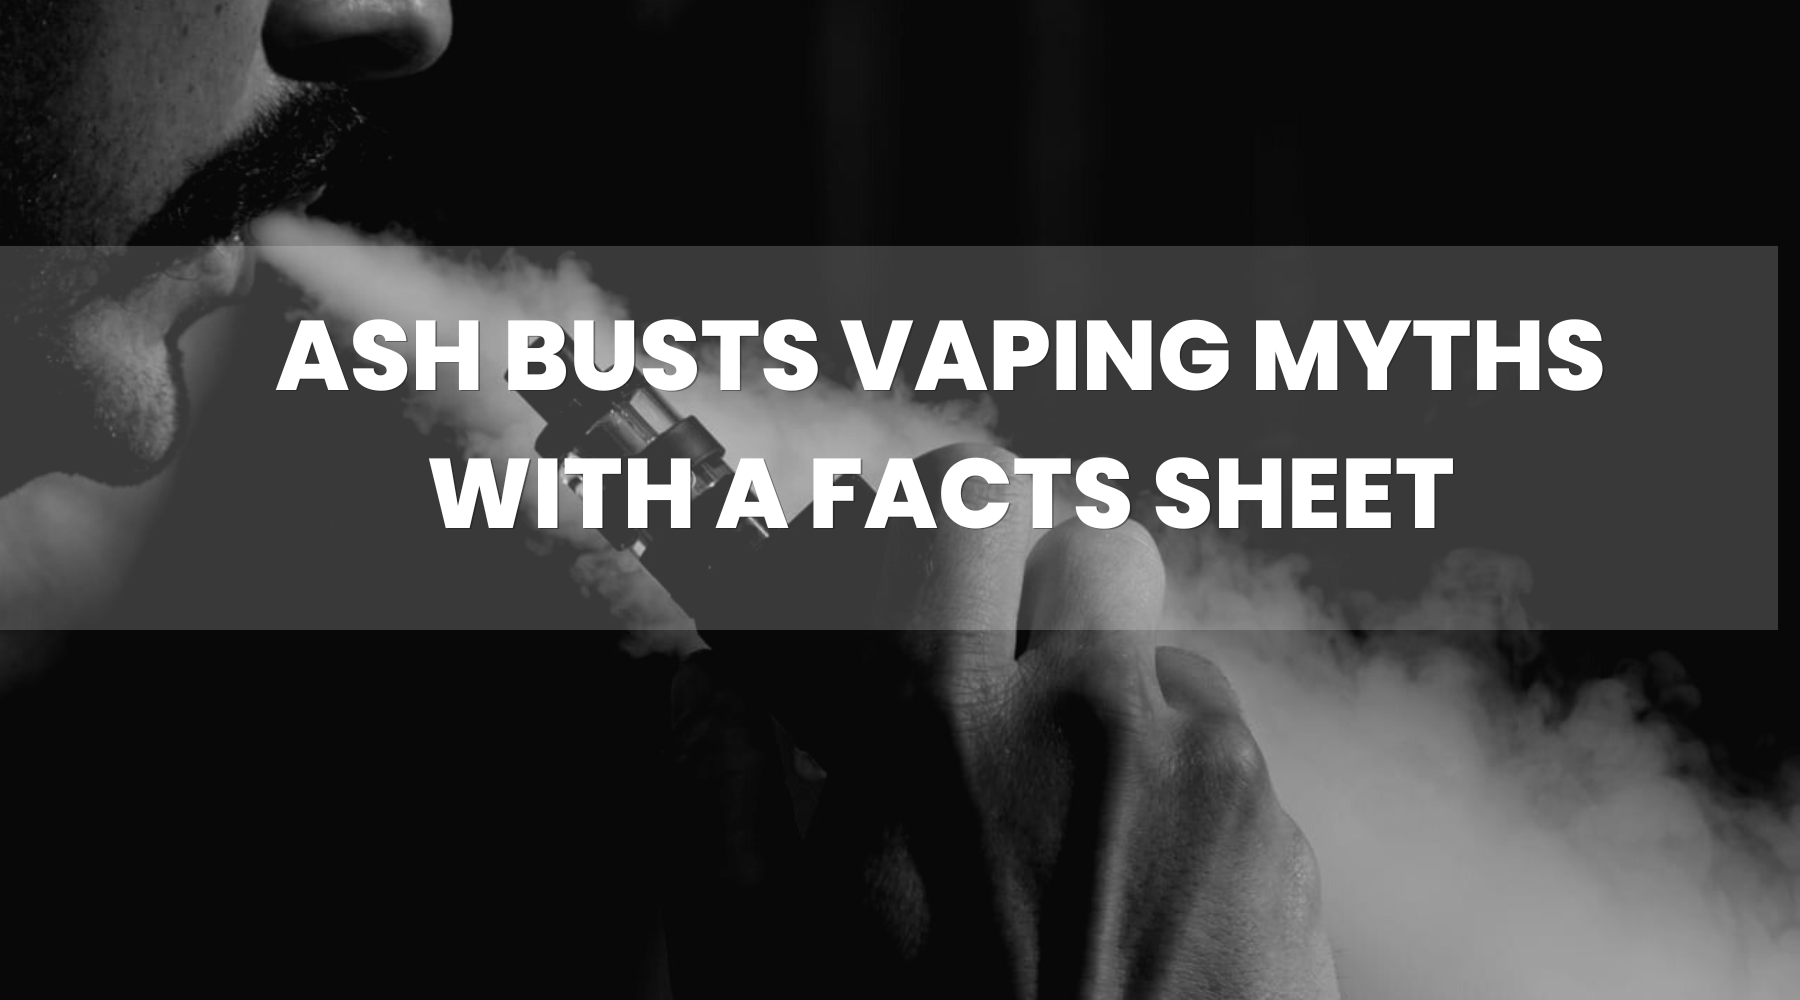 ASH Busts Vaping Myths with a Facts Sheet